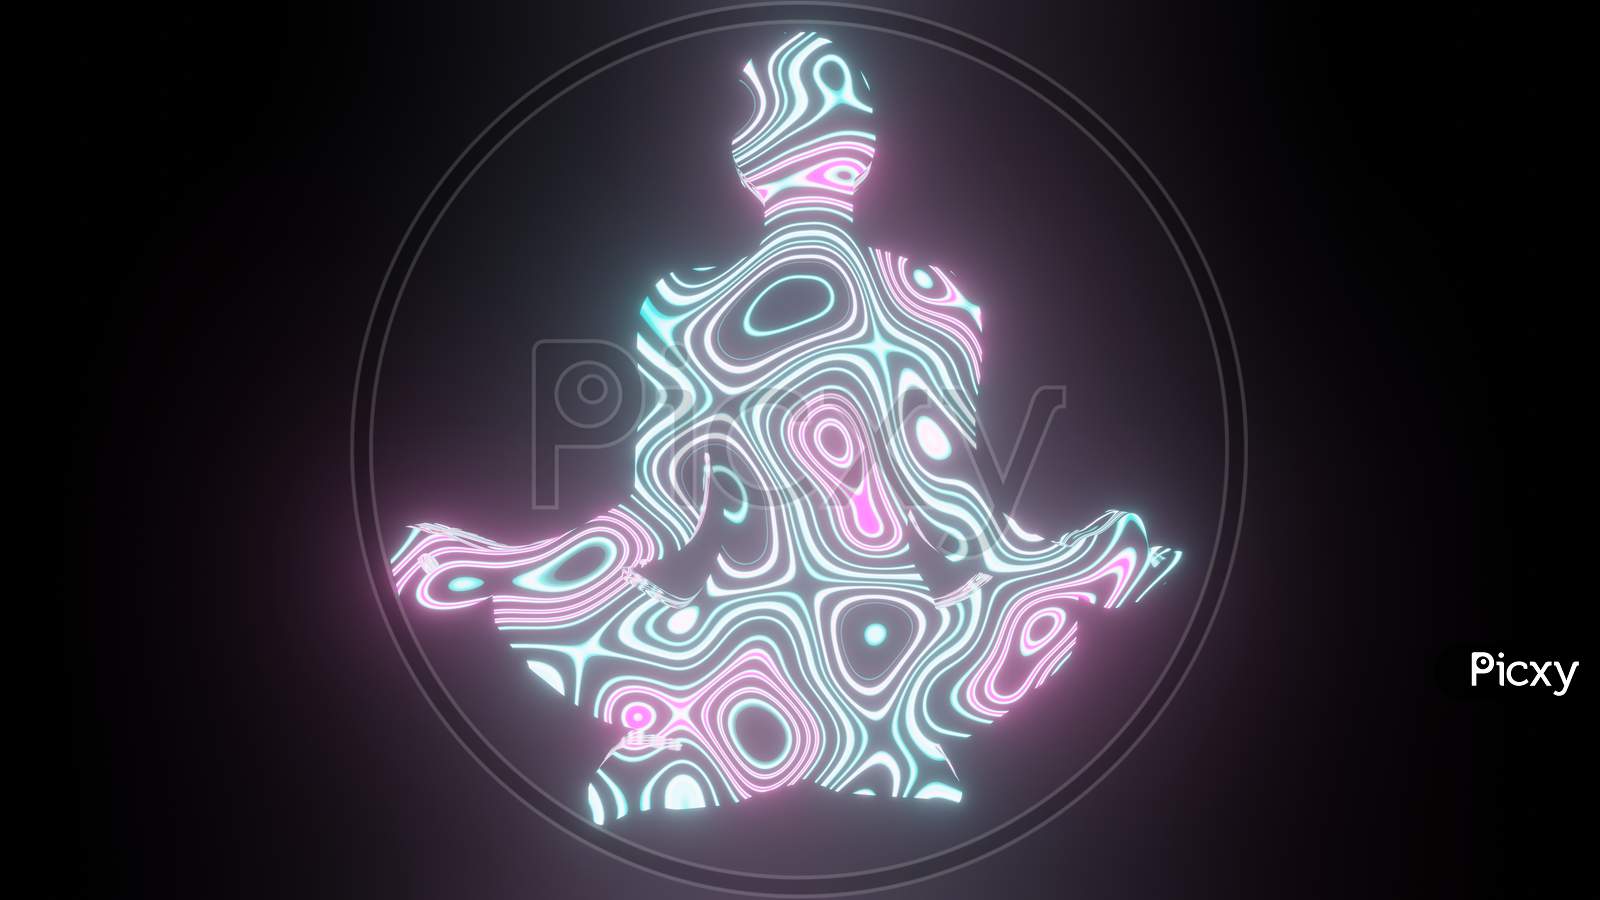 Illustration Graphic Of Beautiful Texture Or Pattern Formation On The Meditating Human Body Shape, Isolated On Black Background. 3D Rendering Abstract Loop Neon Lighting Effect On Person Body.